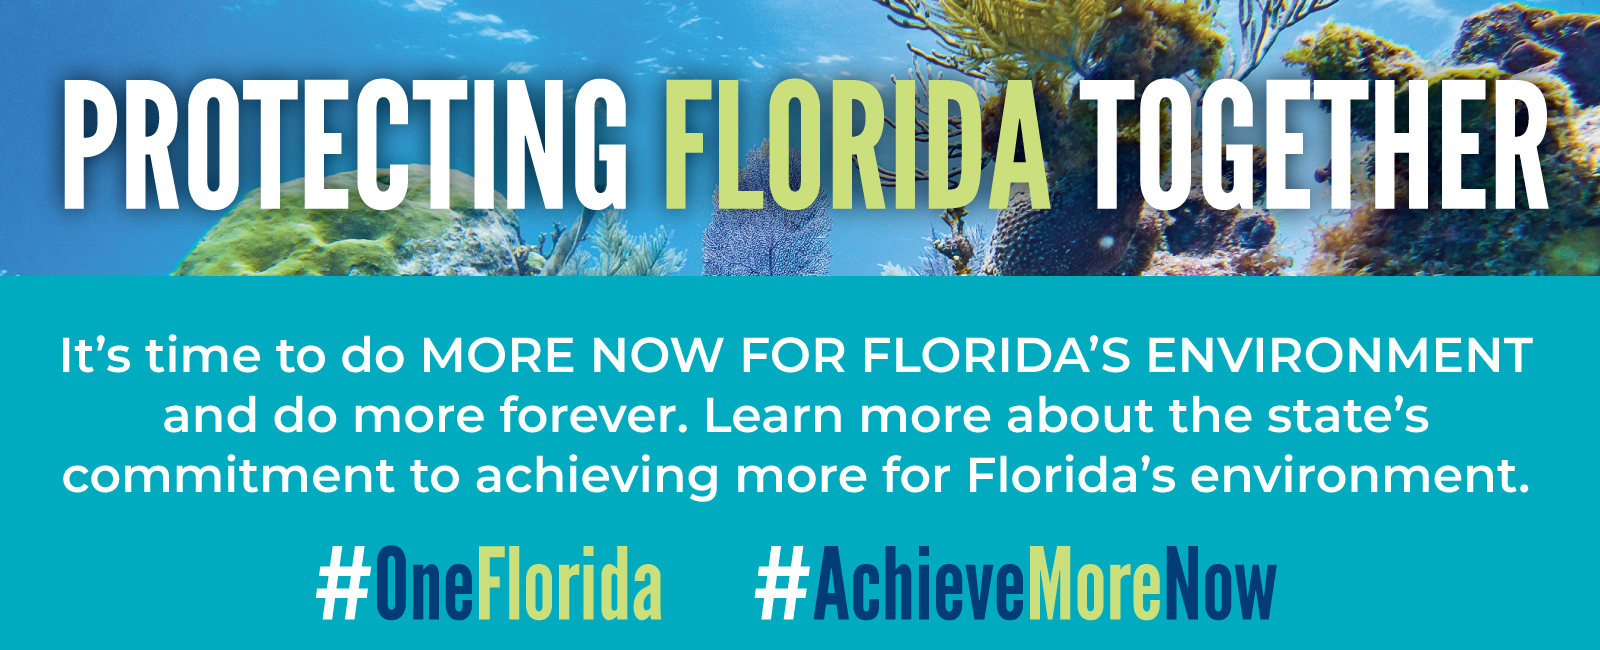 It’s time to do more now for Florida’s environment and do more forever. Learn more about the state’s commitment to achieving more for Florida’s environment.